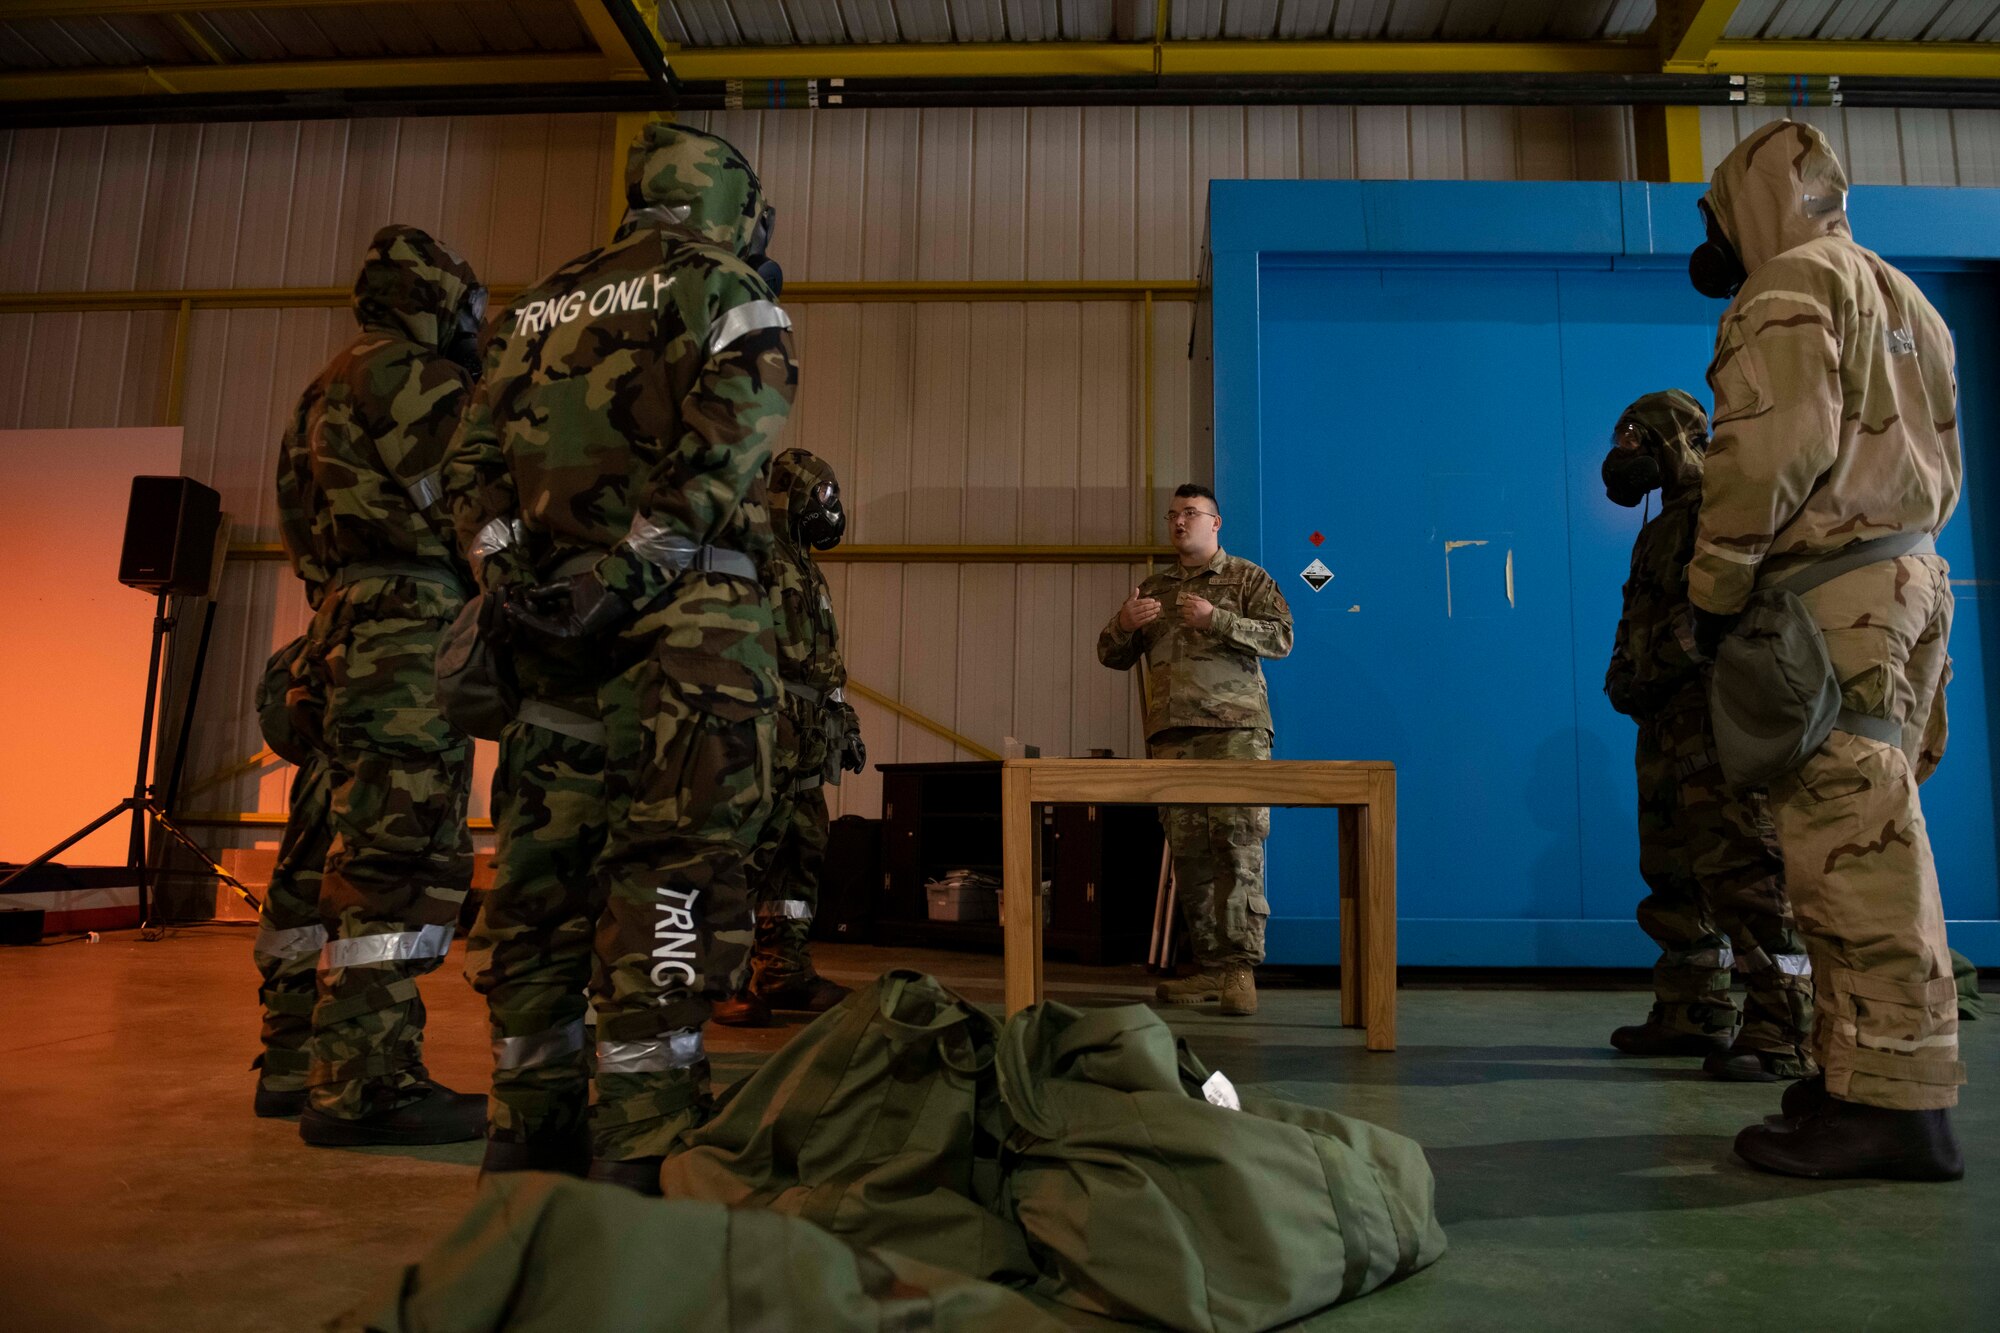 Airmen from the 501st Combat Support Wing receive a brief during Ability to Survive and Operate training at RAF Alconbury, England, Aug. 26, 2021. The ATSO rodeo was designed to reinforce Airmen’s ability to properly utilize their MOPP gear in a potential chemical environment. (U.S. Air Force photo by Senior Airman Jennifer Zima)